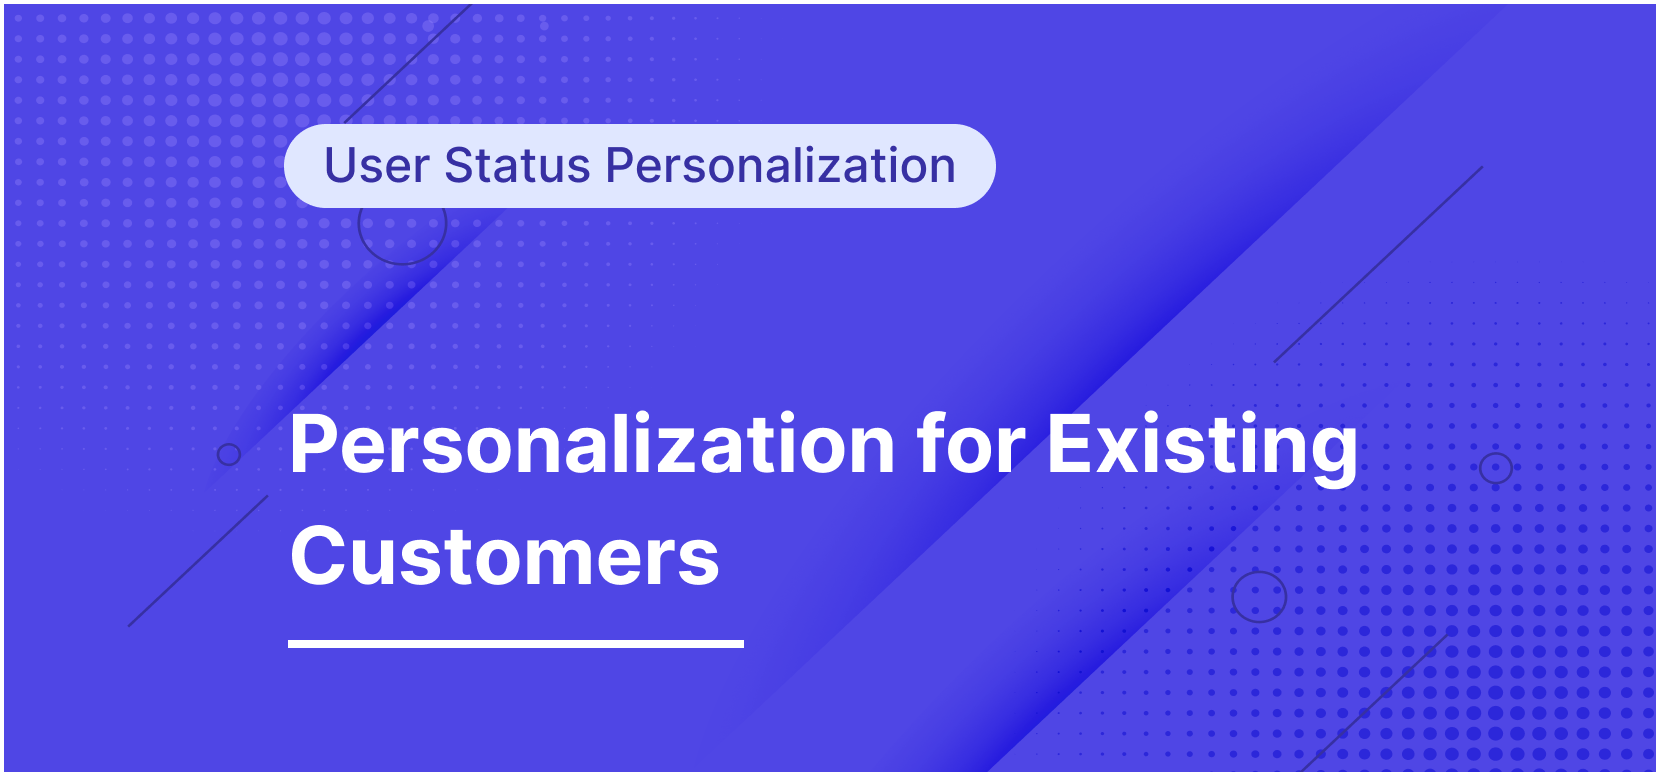 How to Upsell Existing Customers with Personalization